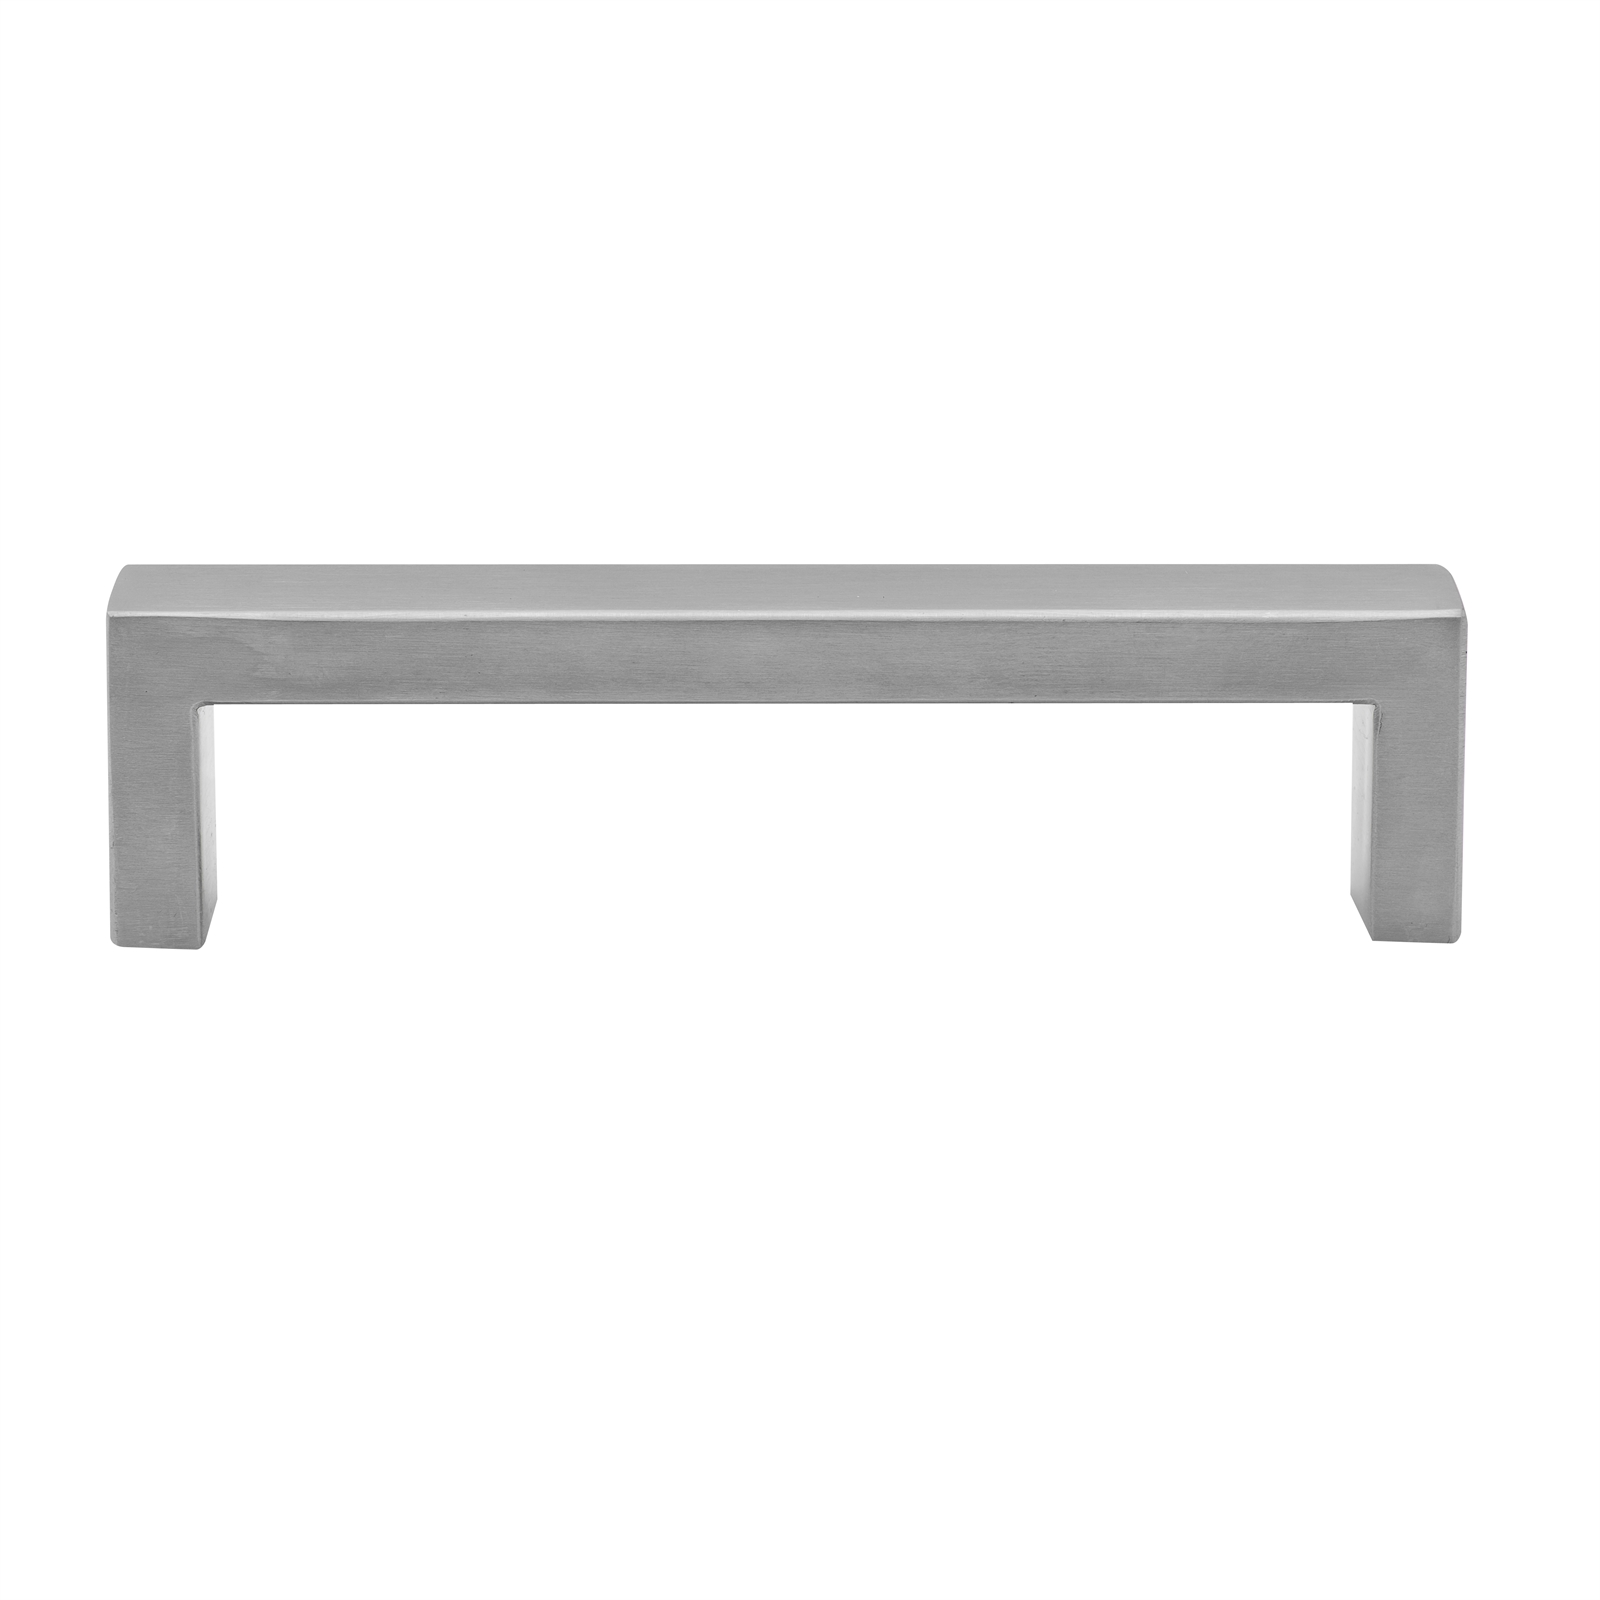 Prestige 128mm Stainless Steel Square Pull Handle